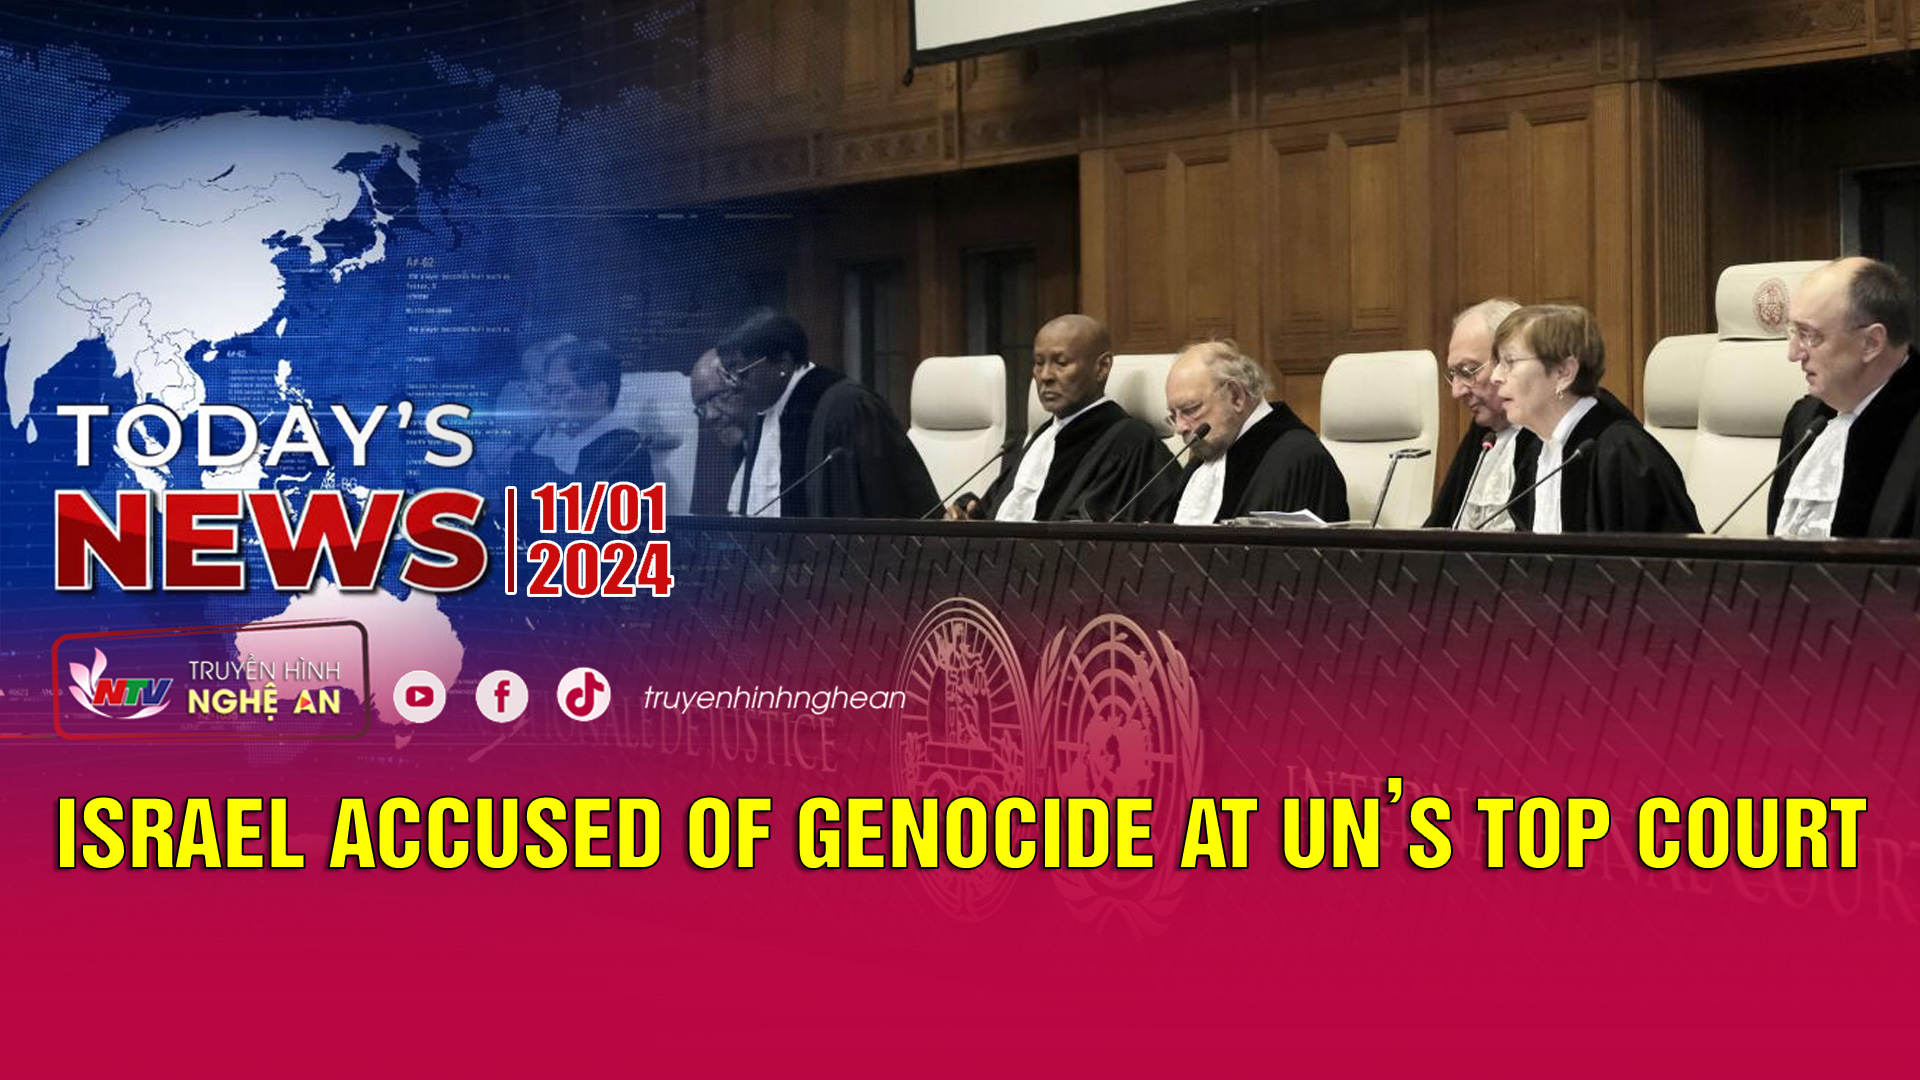 Today's News - 11/01/2024: Israel accused of genocide at UN’s top court